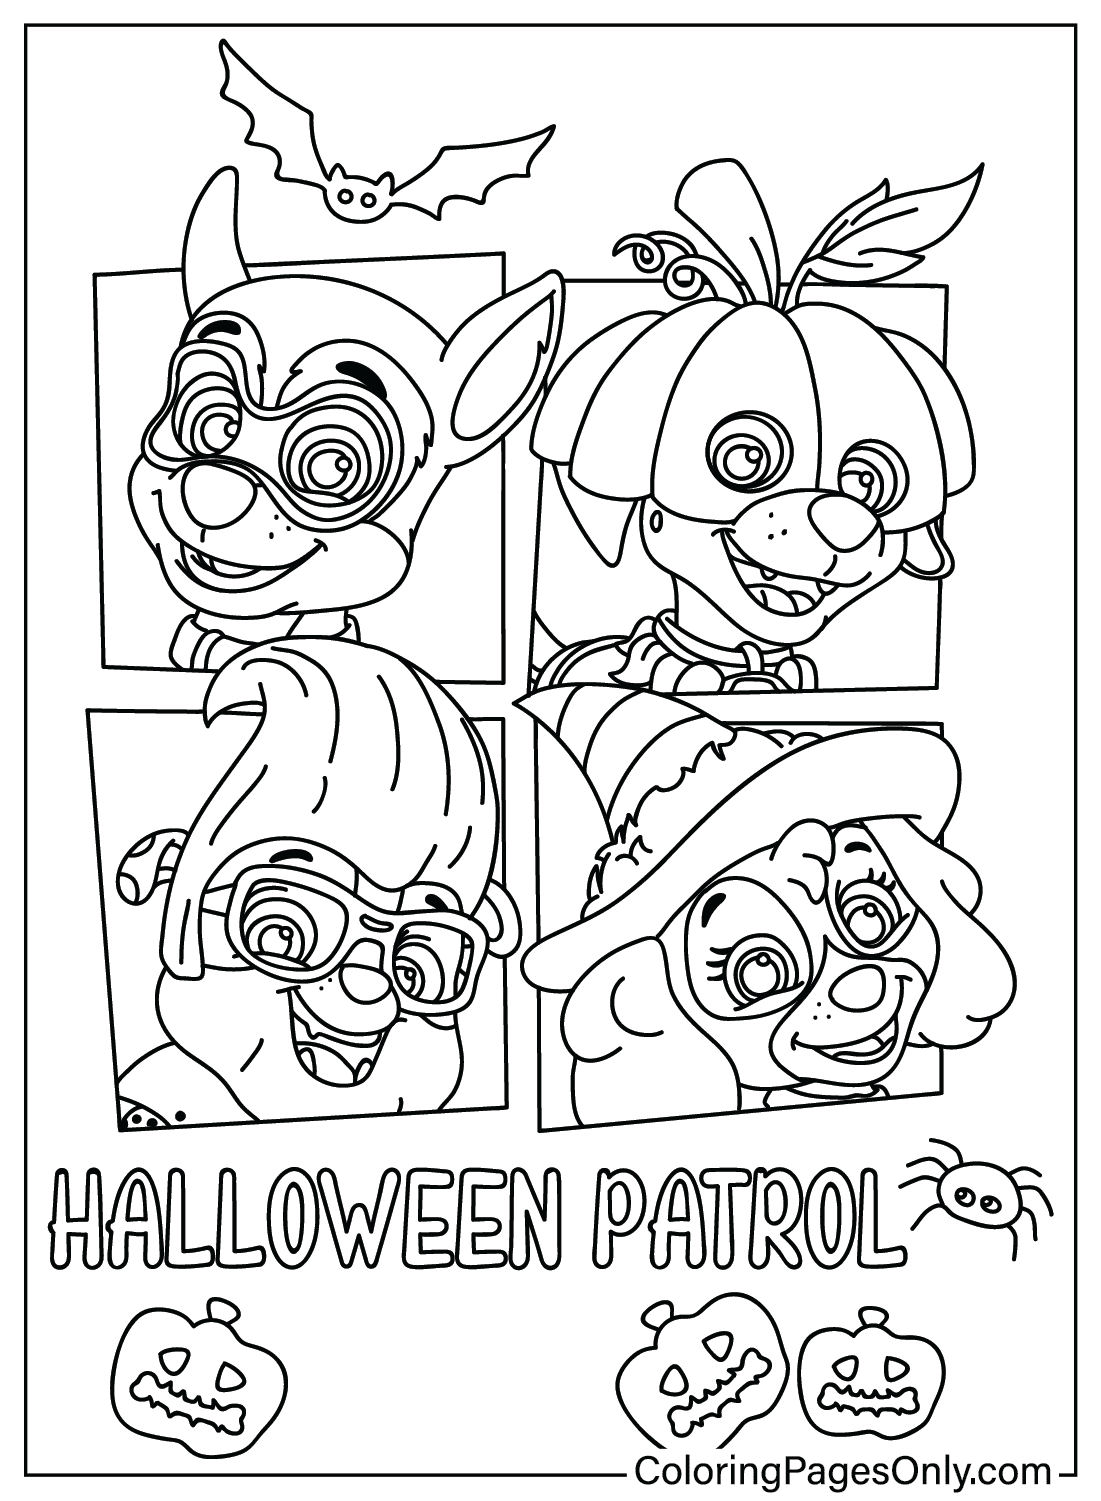 Paw Patrol Halloween Coloring Pages to Download from Paw Patrol Halloween